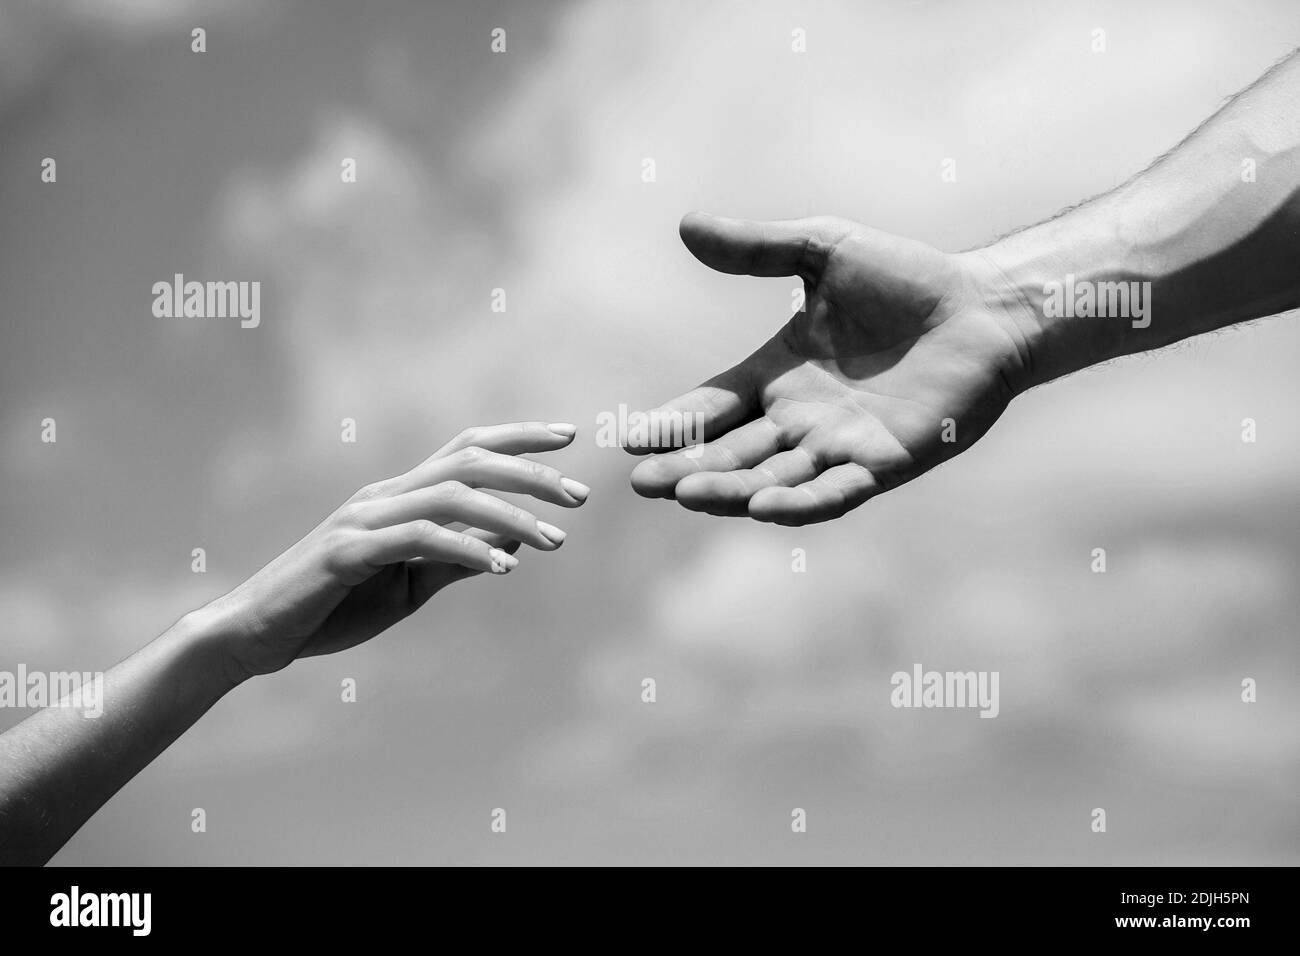 Solidarity, compassion, and charity, rescue. Hands of man and woman reaching to each other, support. Giving a helping hand. Lending a helping hand Stock Photo